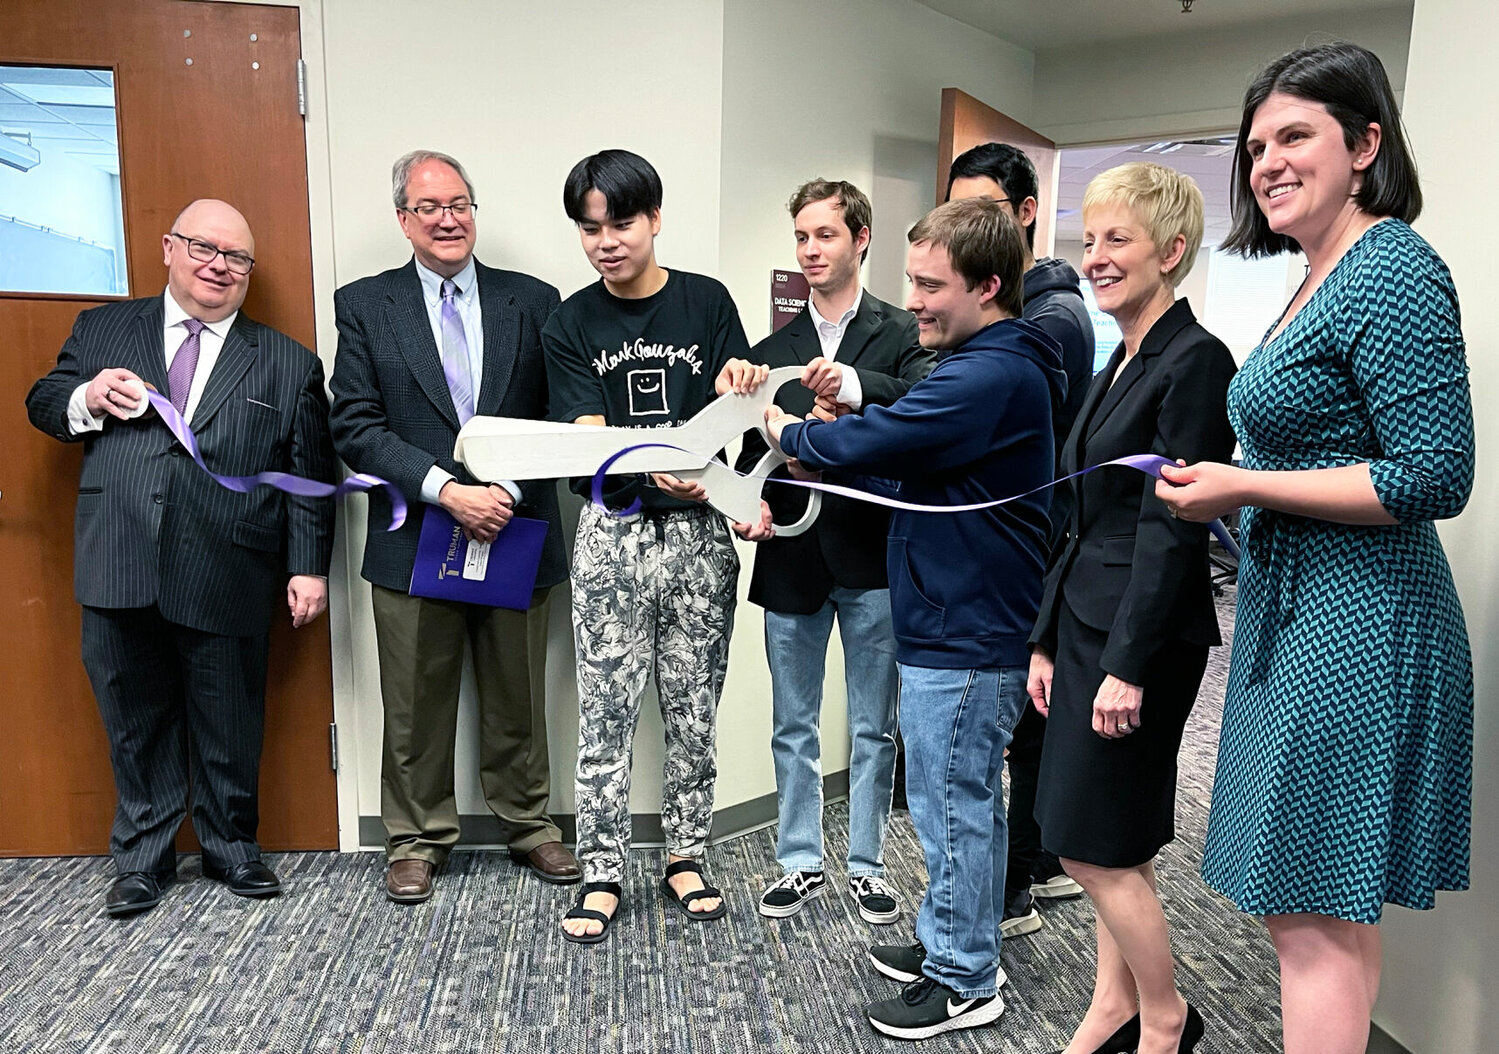 A ribbon cutting and open house were held for the new Data Science Teaching Lab in Violette Hall at Truman State University.